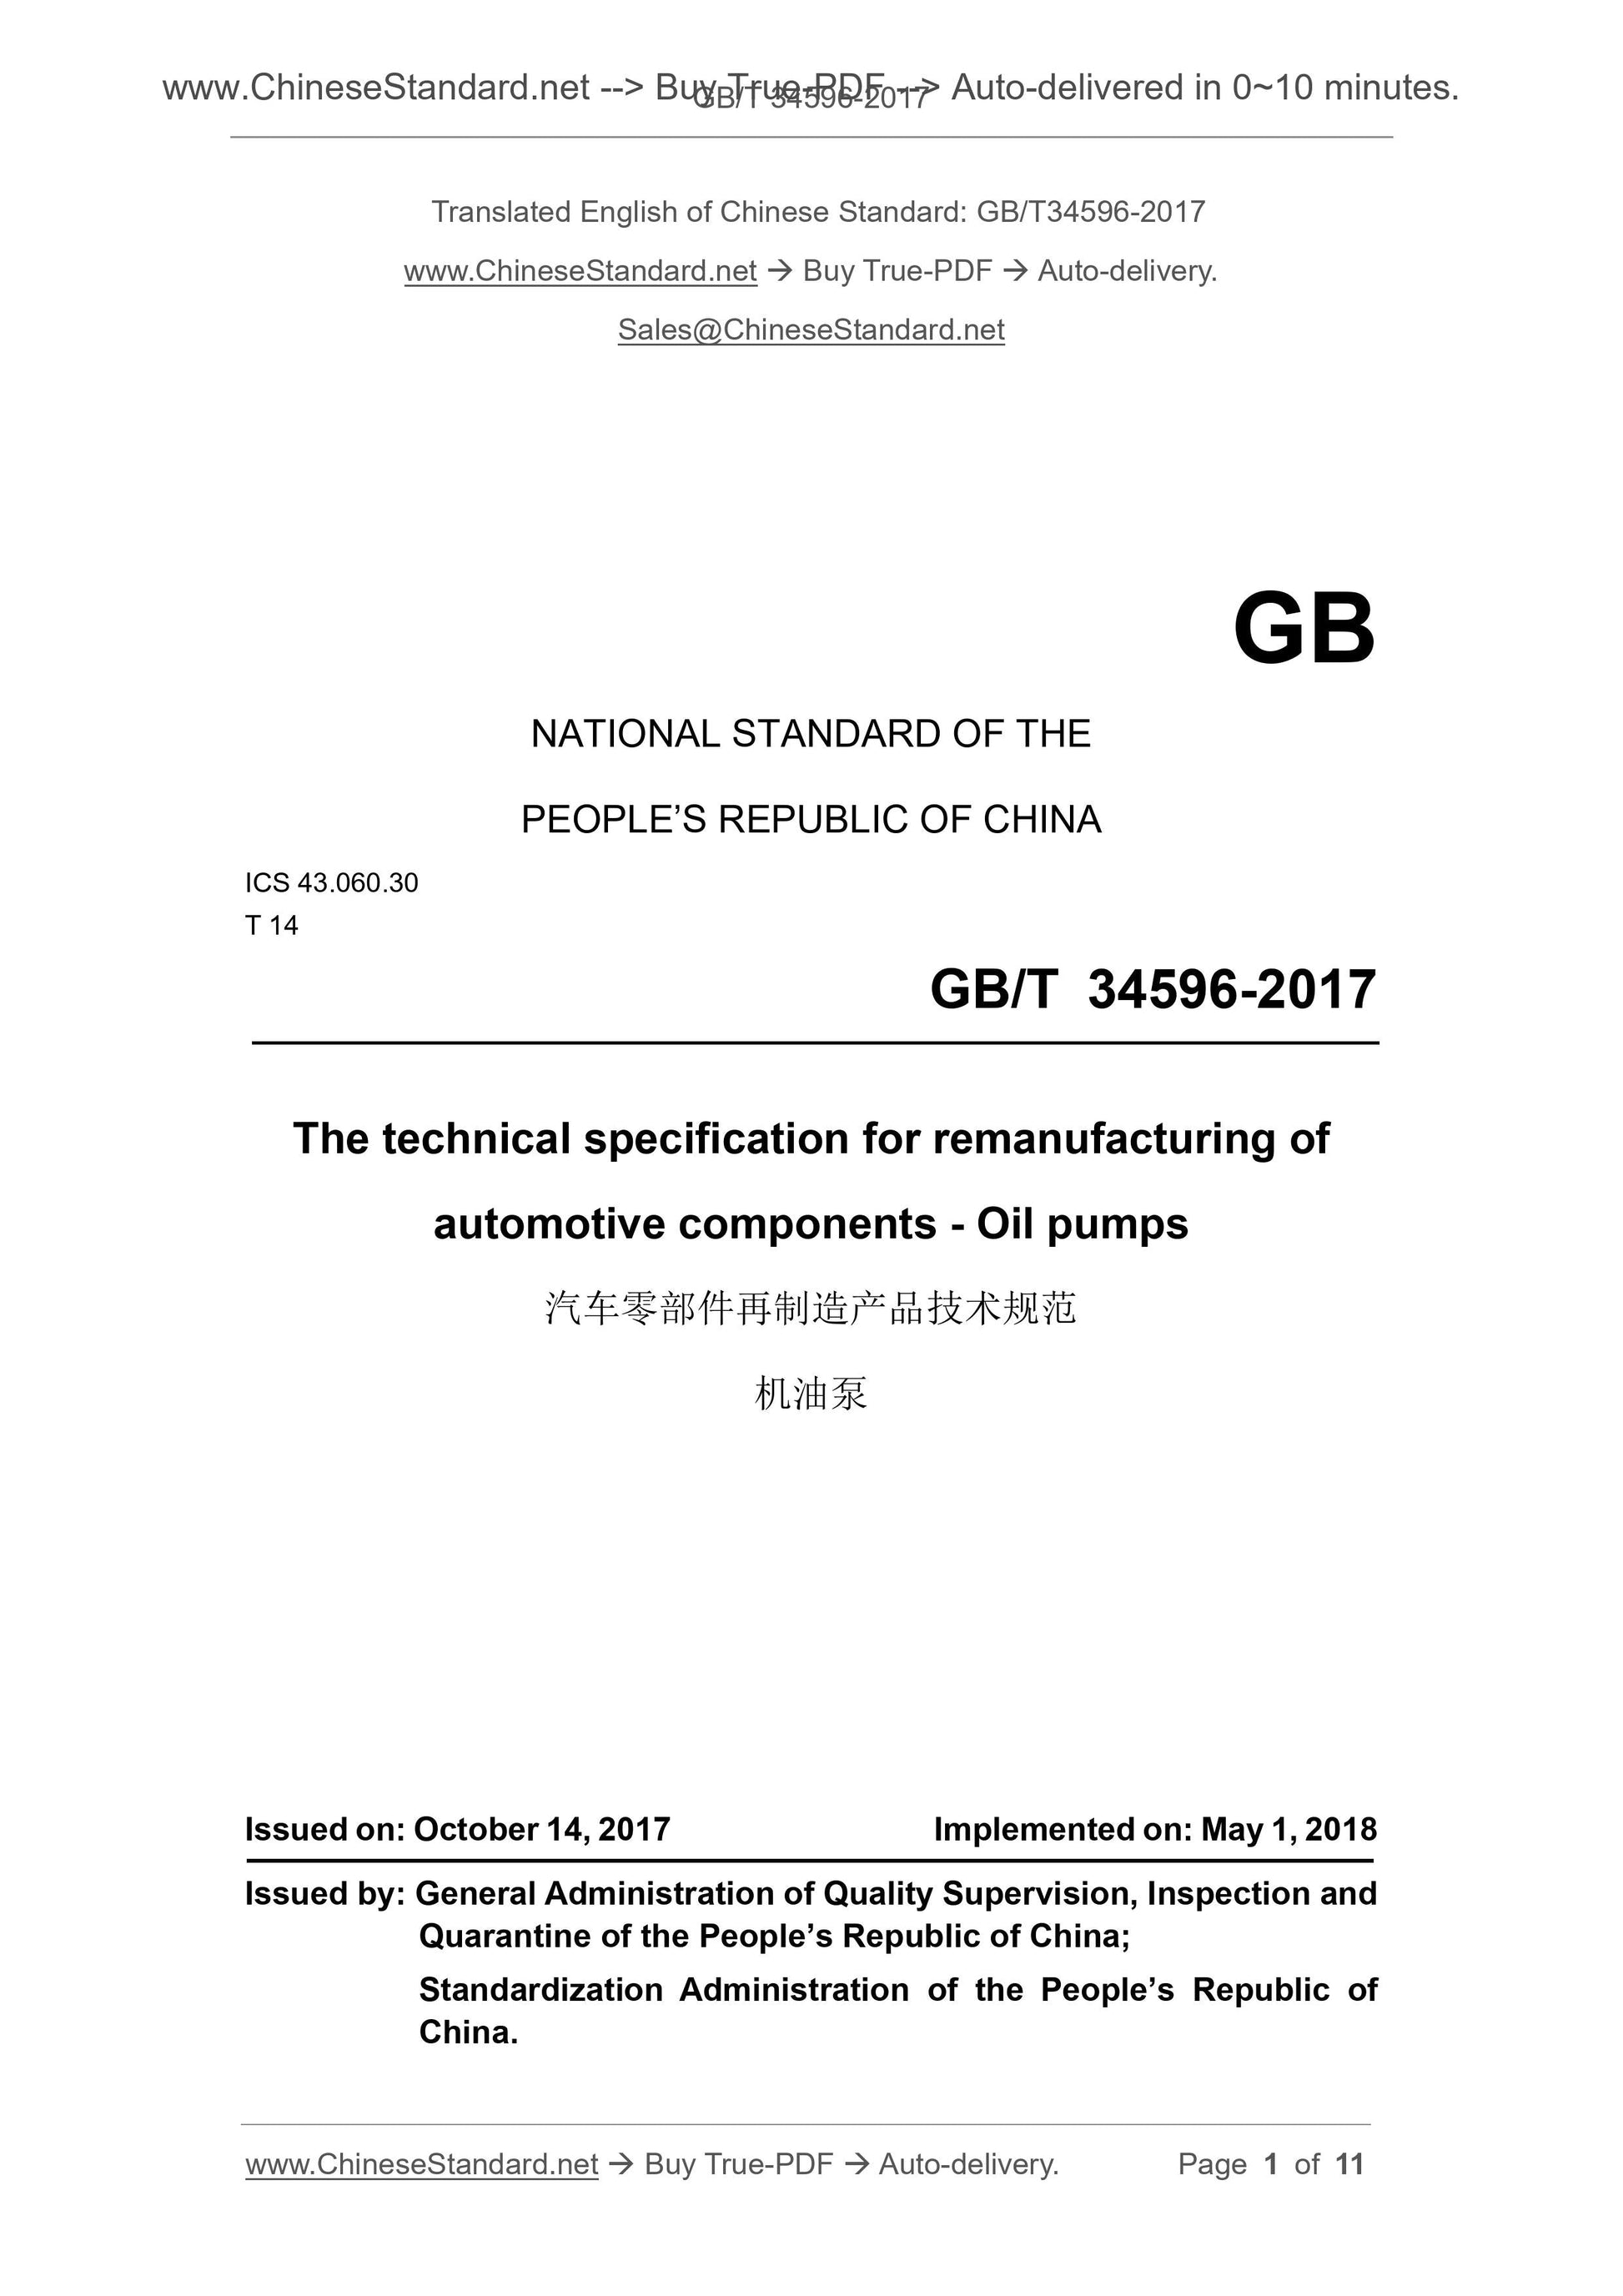 GB/T 34596-2017 Page 1